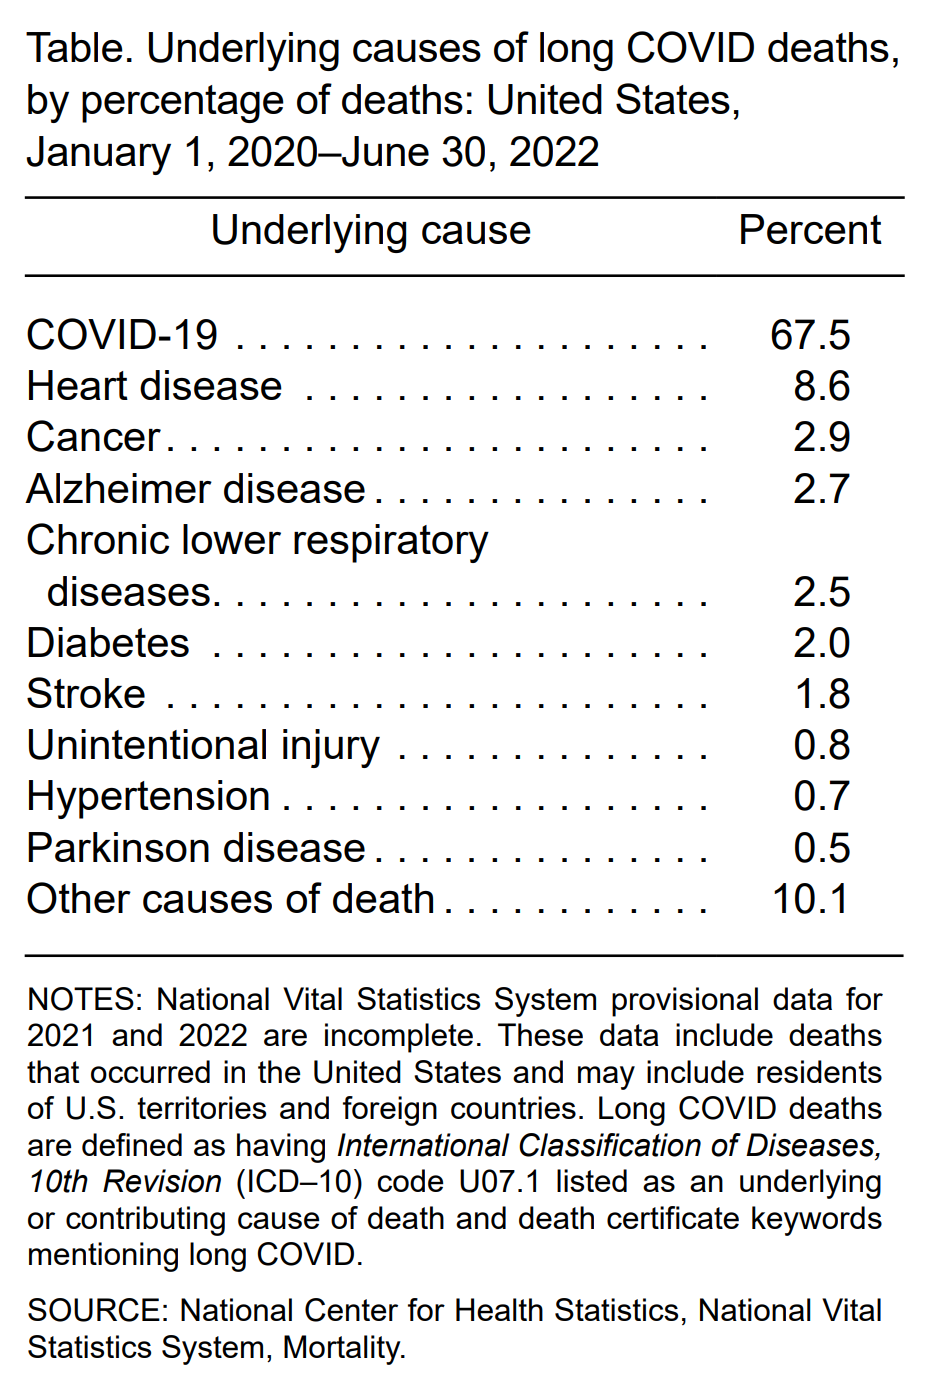 Underlying causes of long COVID deaths in the United States, by percentage of deaths, 1 January 2020-30 June 2022. Graphic: Ahmad, et al., 2022 / NVSS / CDC